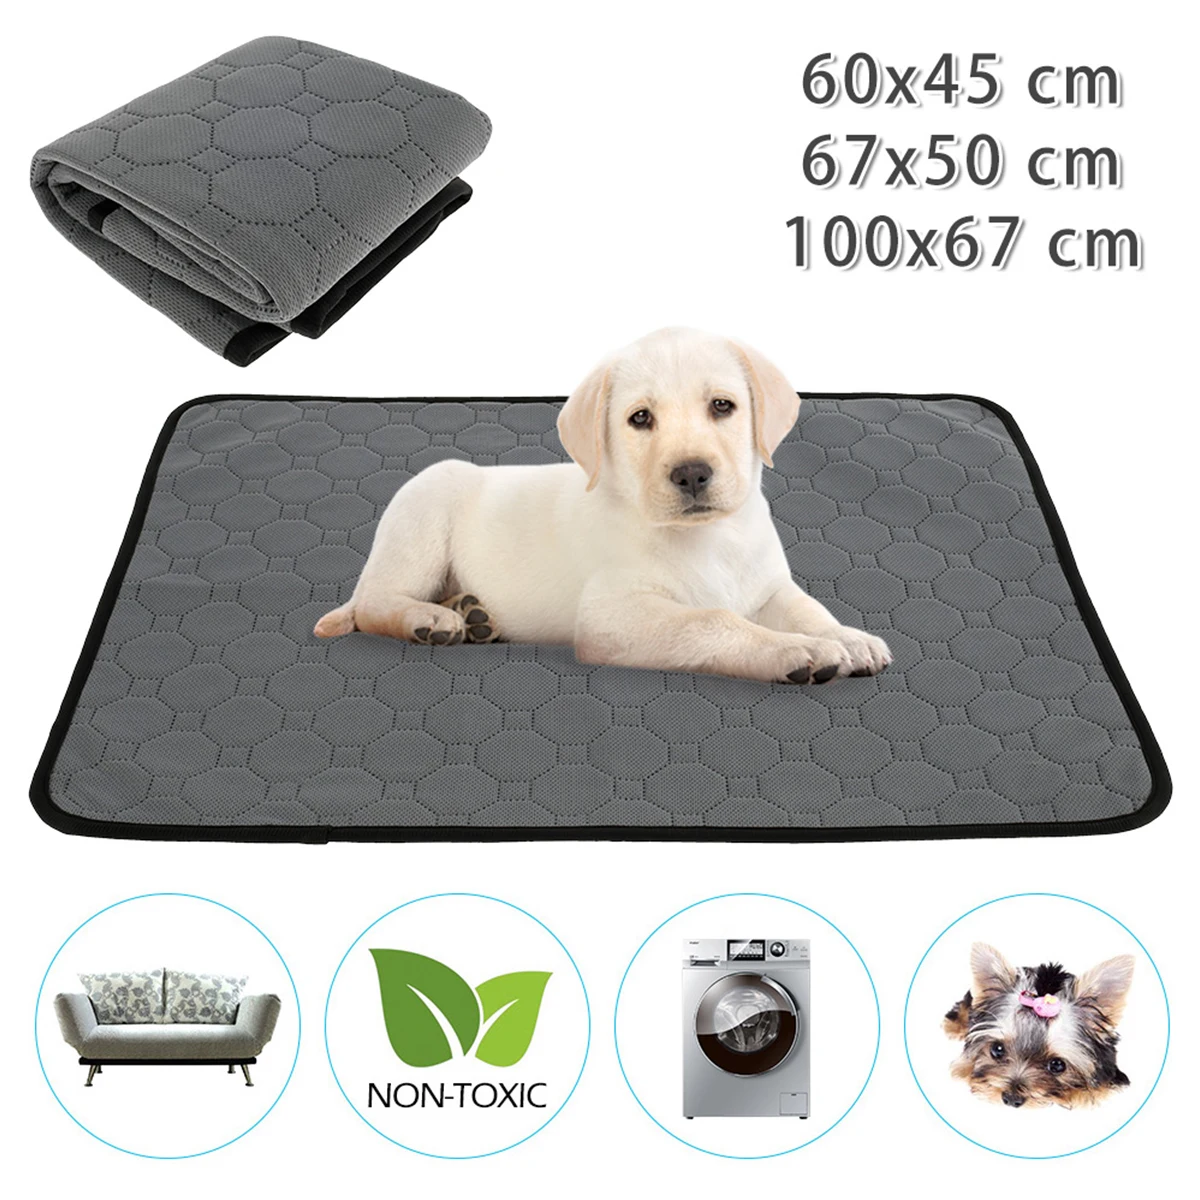 

Washable Dog Pee Pads Reusable Puppy Training Pad Waterproof Puppy Pads with Great Urine Absorption for Training Whelping